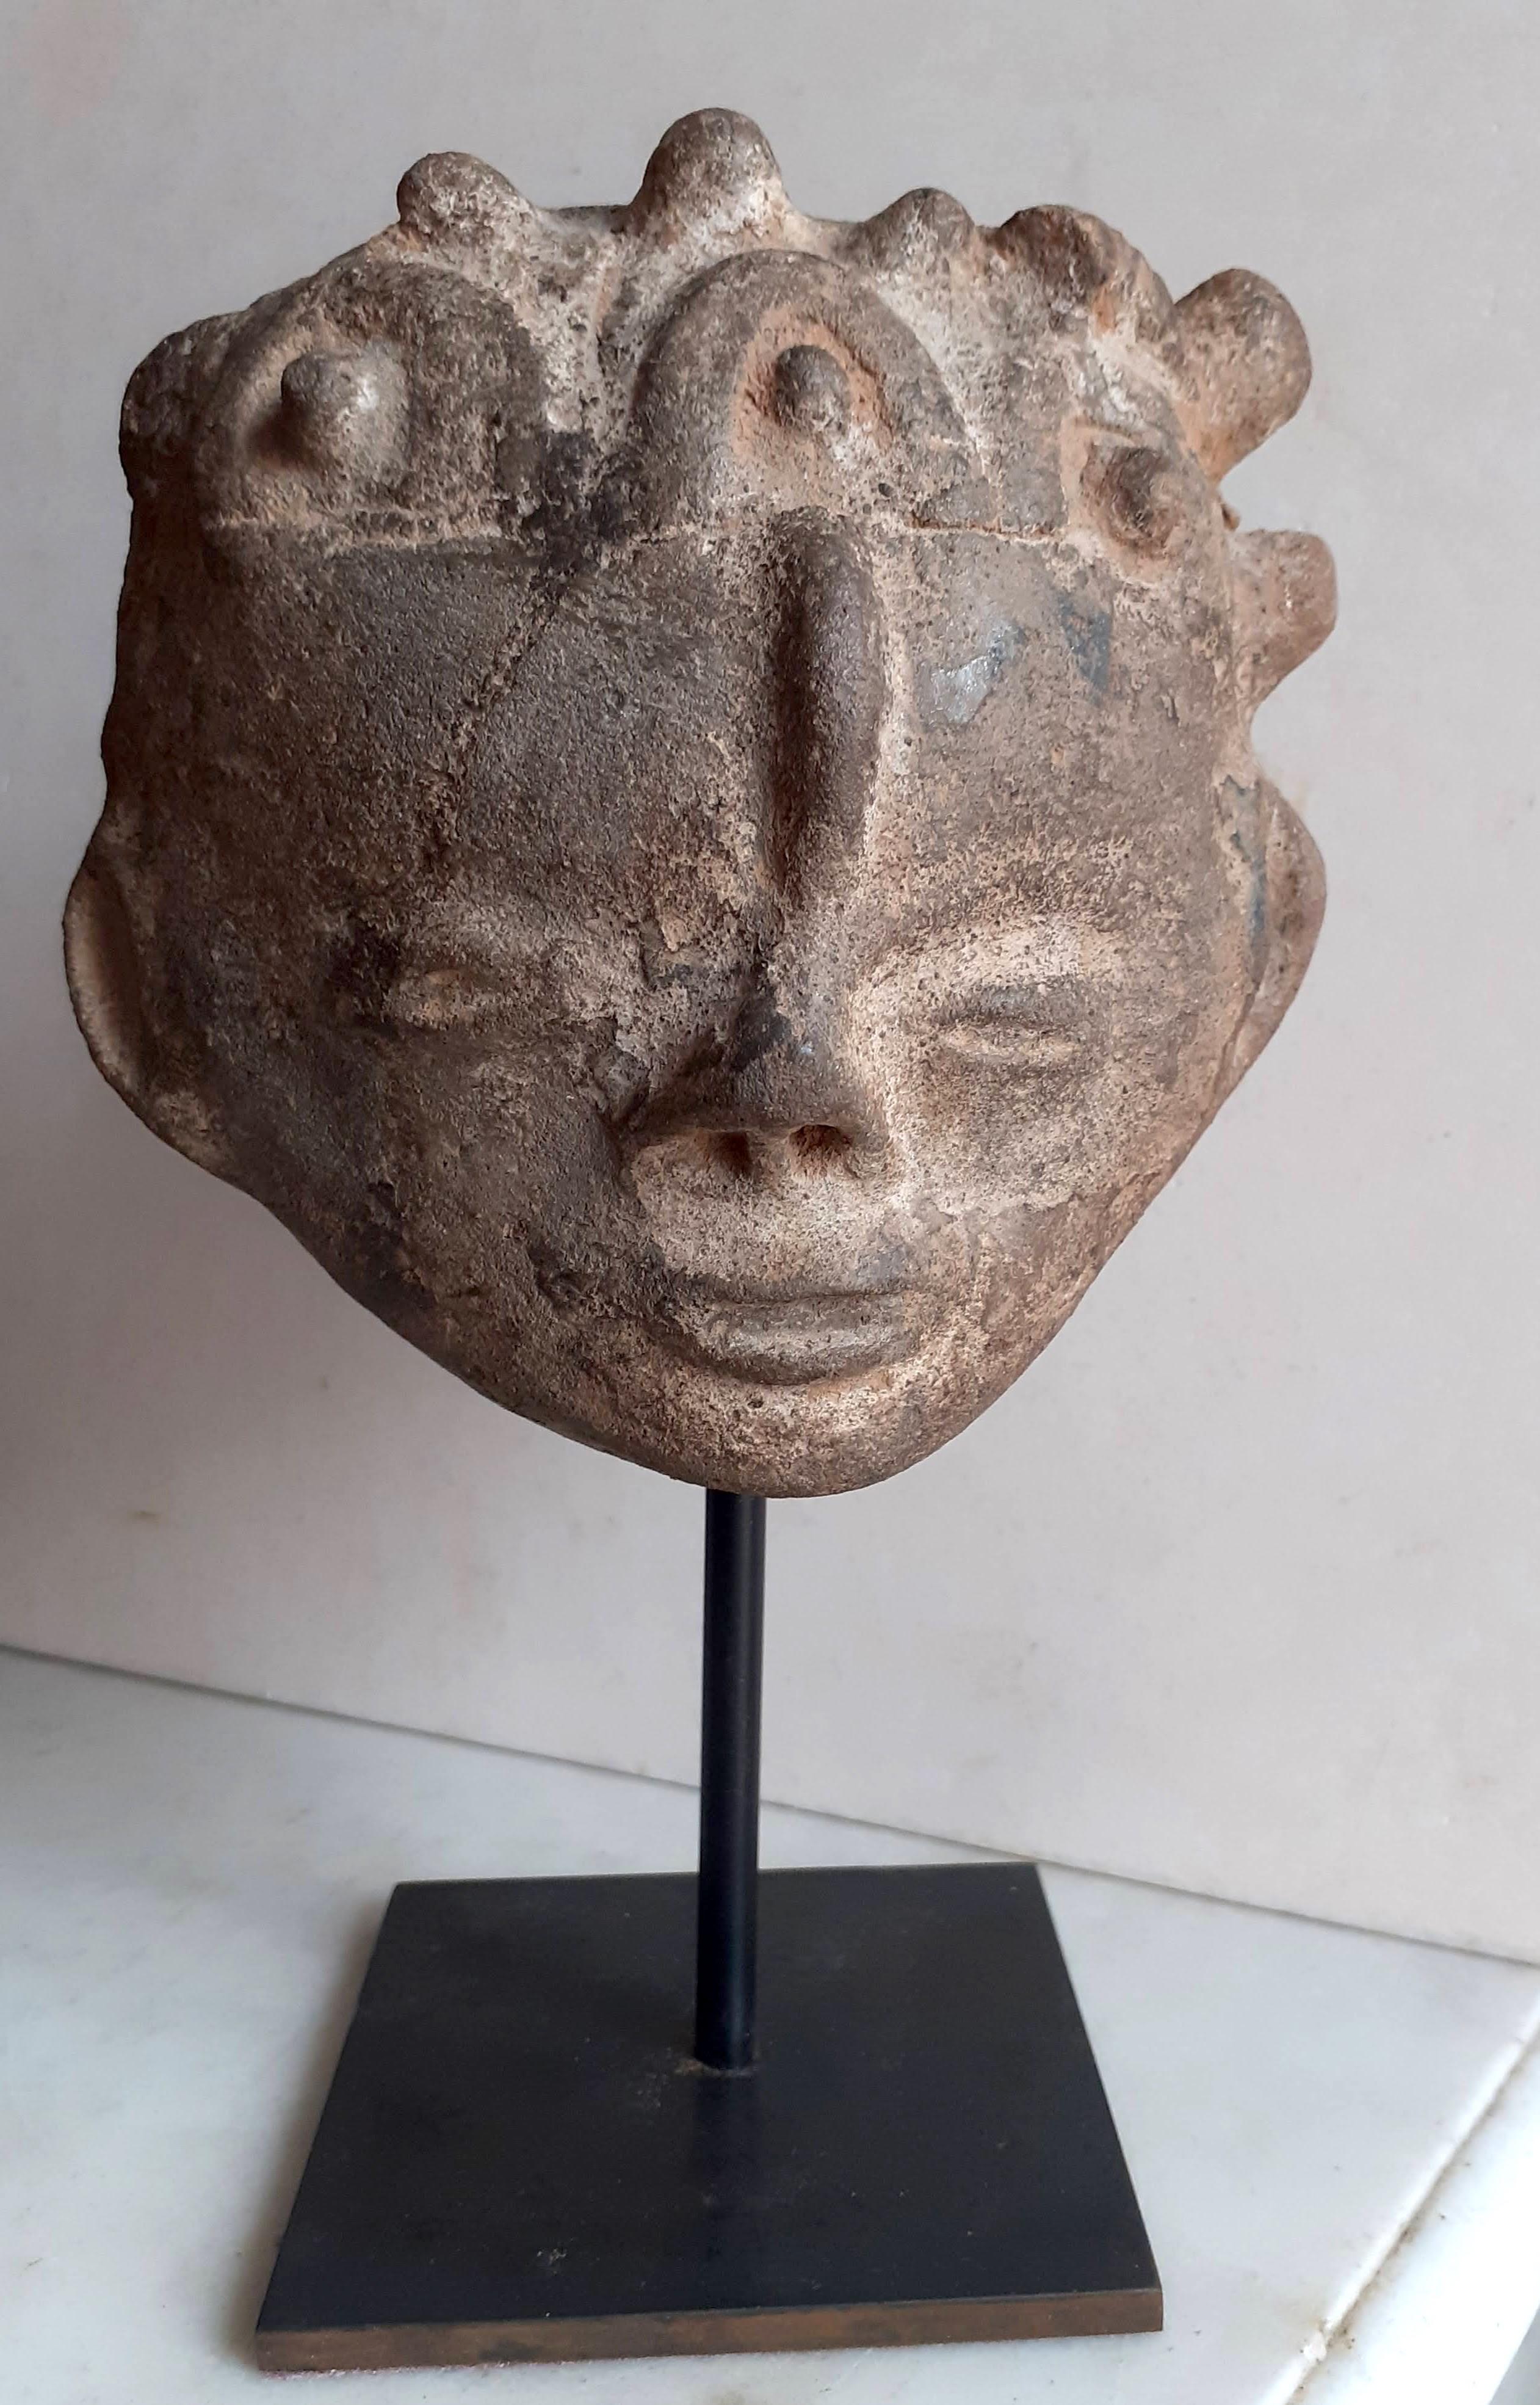 This elegant terracotta head is a memorial portrait (nsodie) of an Akan nobleman from the part of Africa which is today southern Ghana and southeastern Côte d'Ivoire. It is an idealised representation whose serene,  joyful expression and